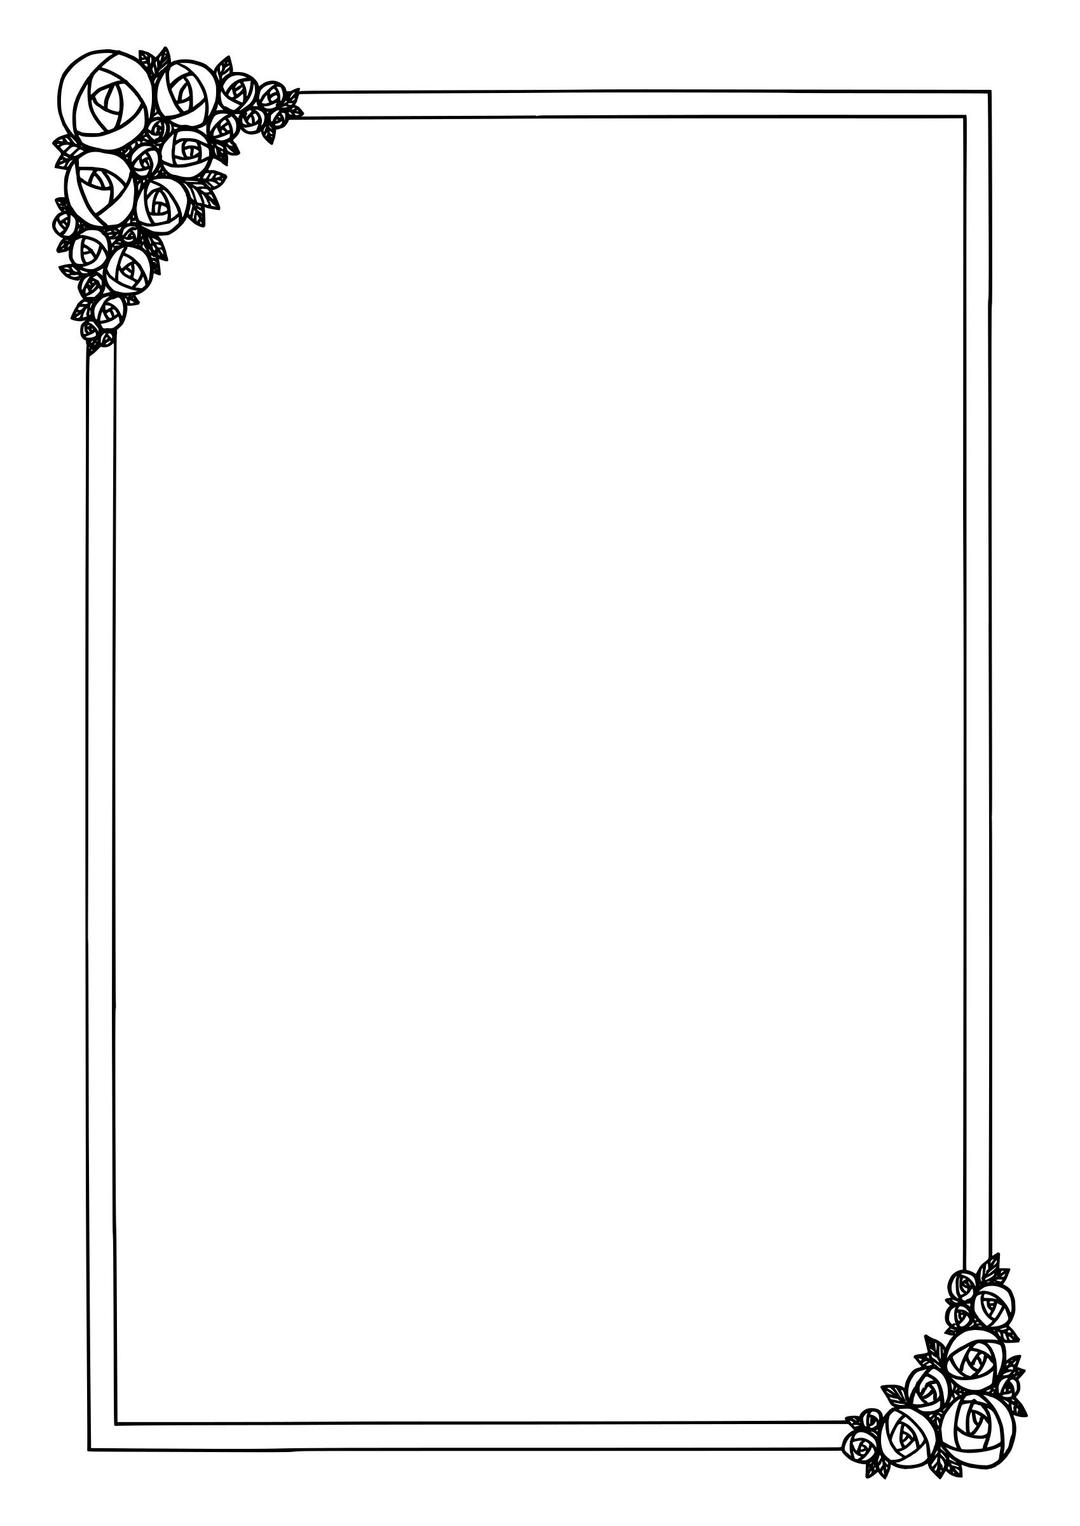 Border with Roses png transparent